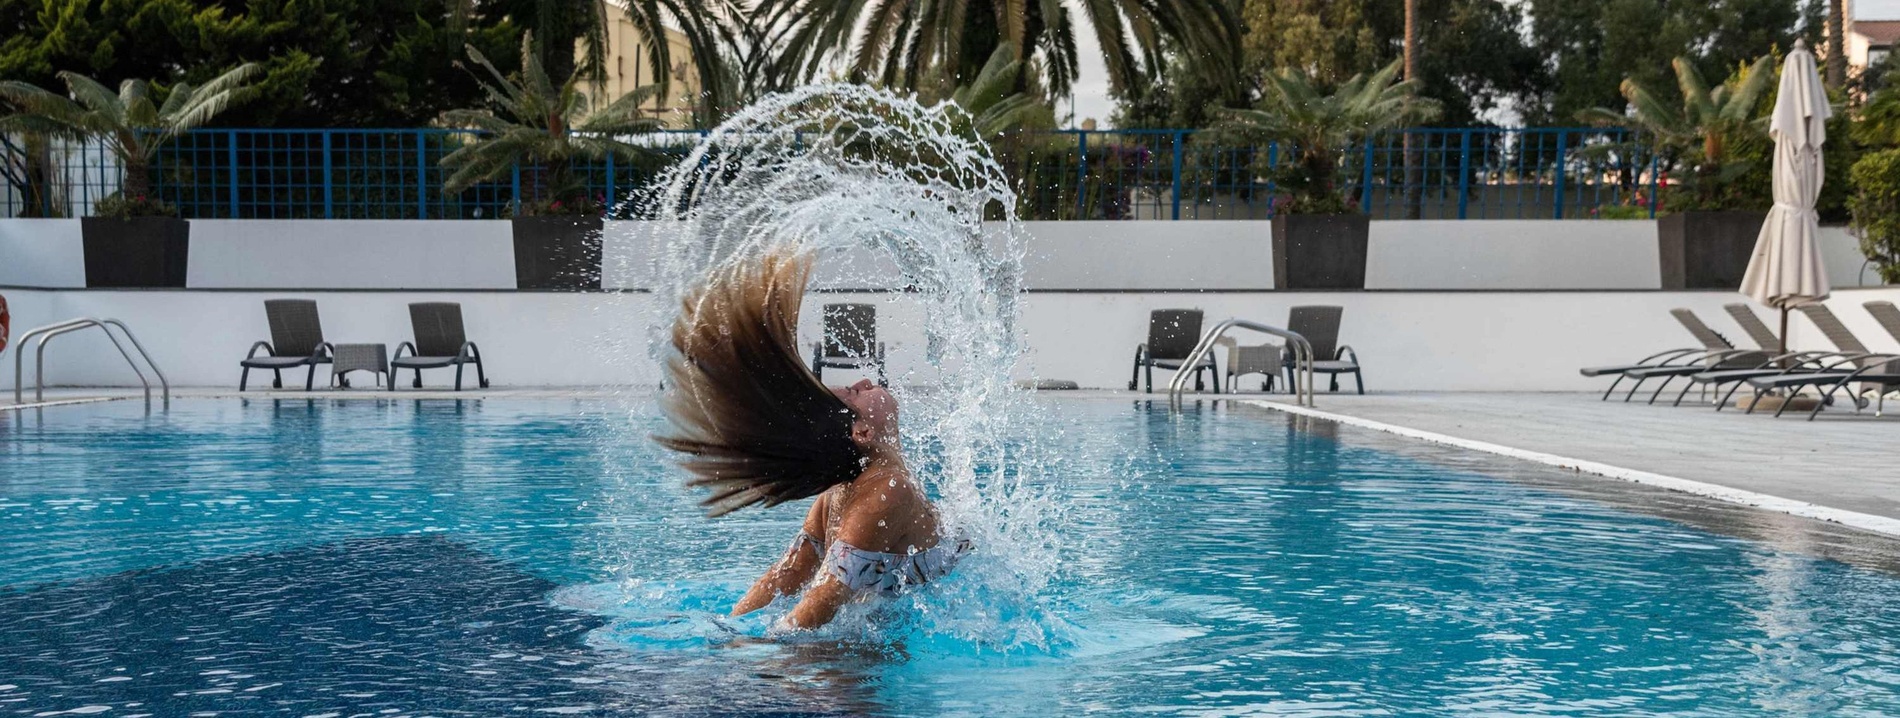 a woman is splashing her hair in a swimming pool